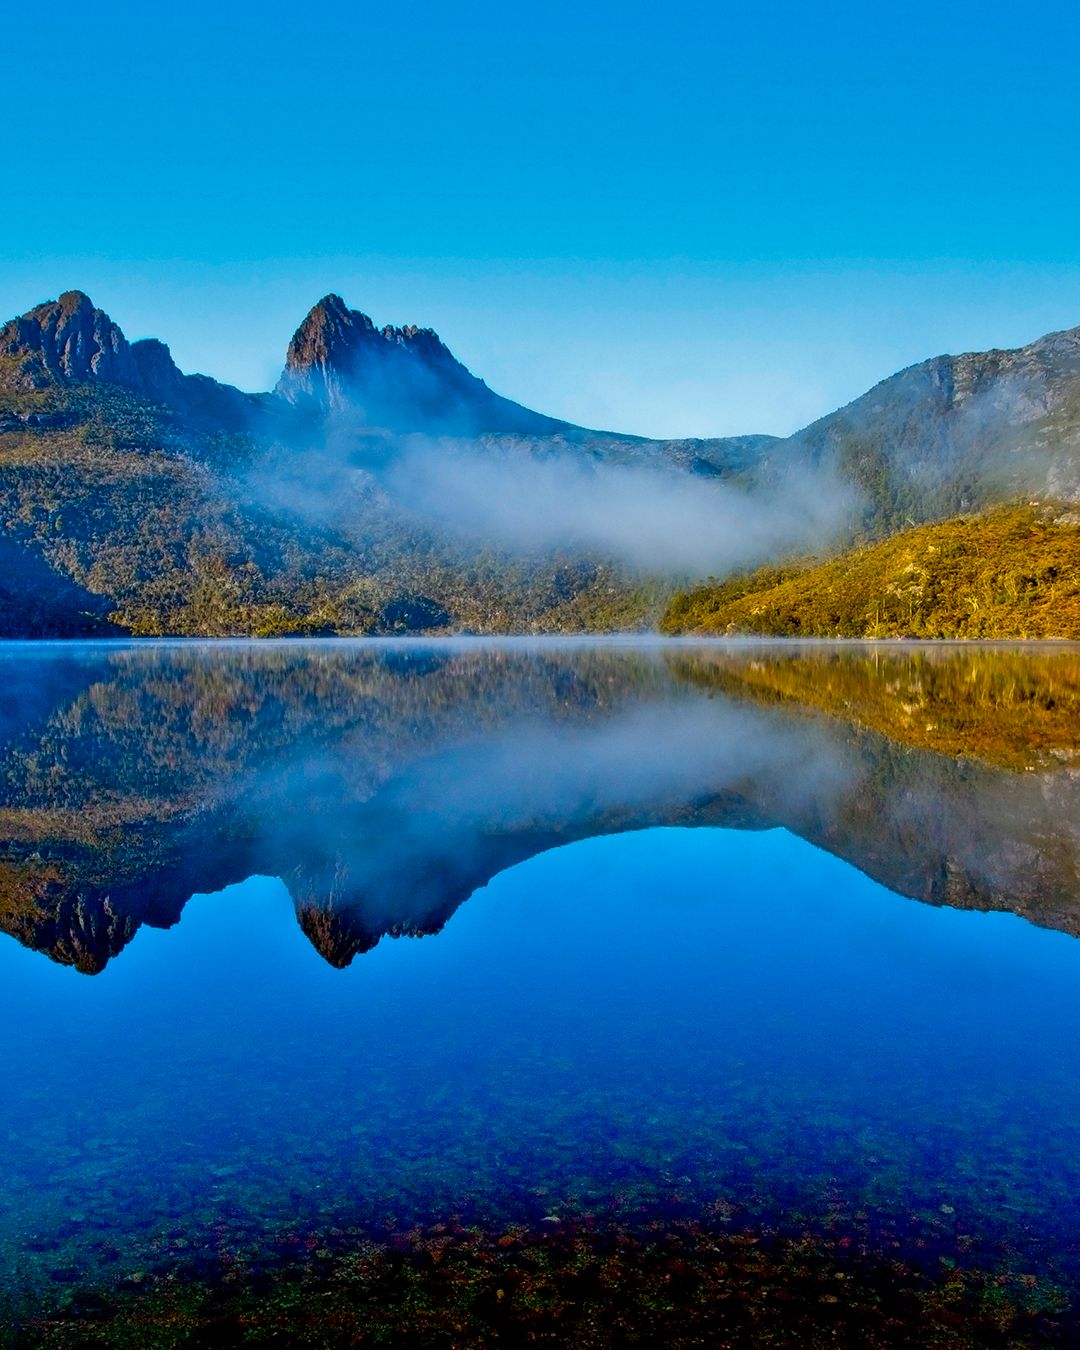 Cradle Mountain looms above a lake, in which it's reflection shows in the glass-like lake.